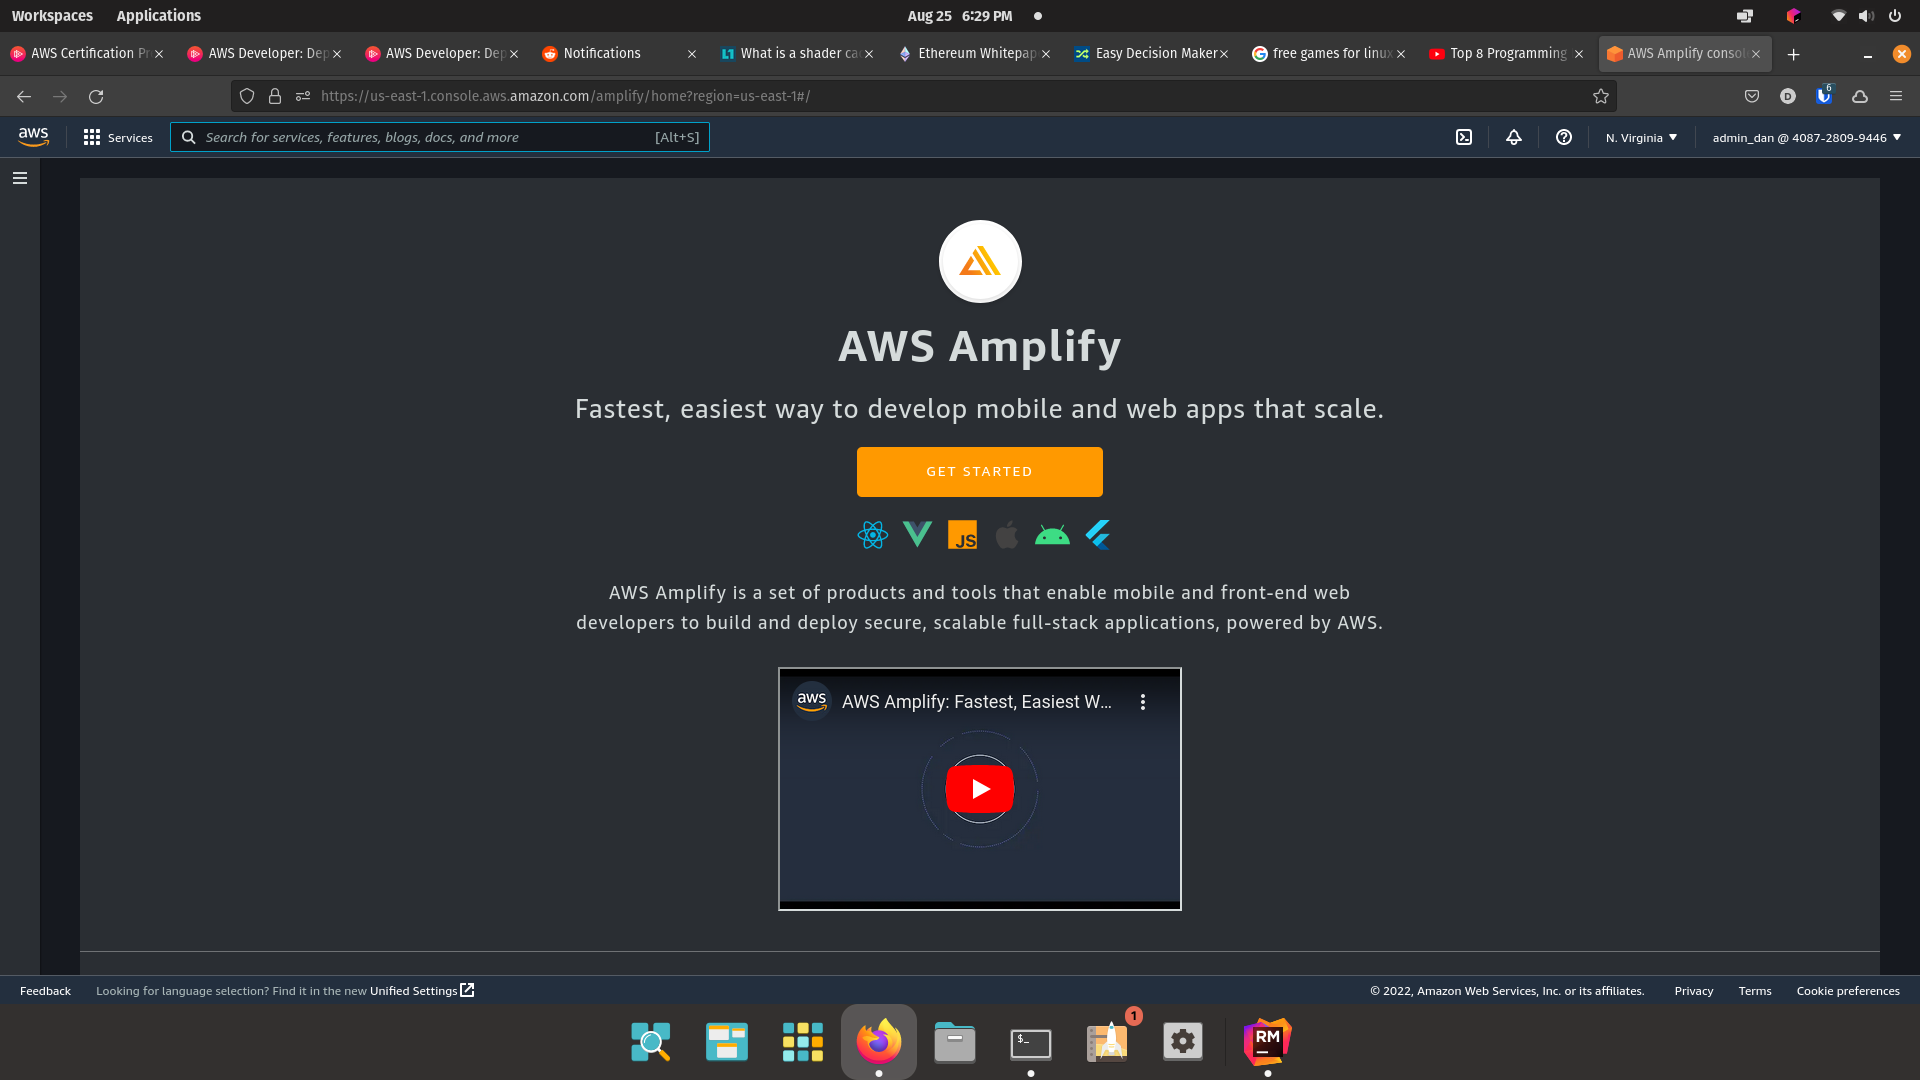 AWS Amplify Home page